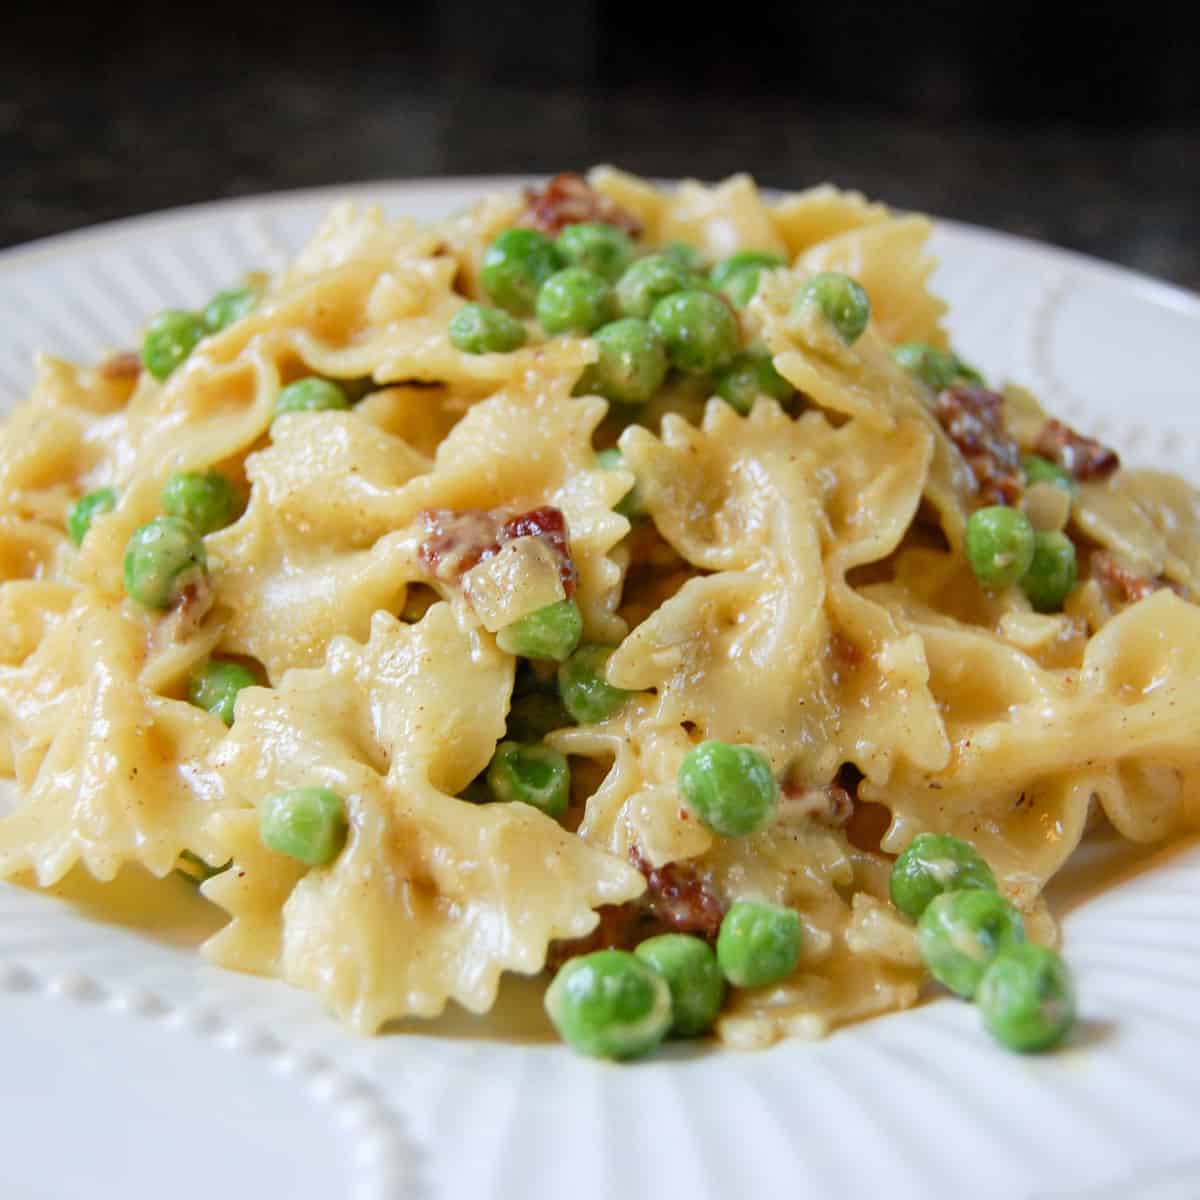 pasta carbonara with bowtie pasta, peas, and chopped bacon on white plate